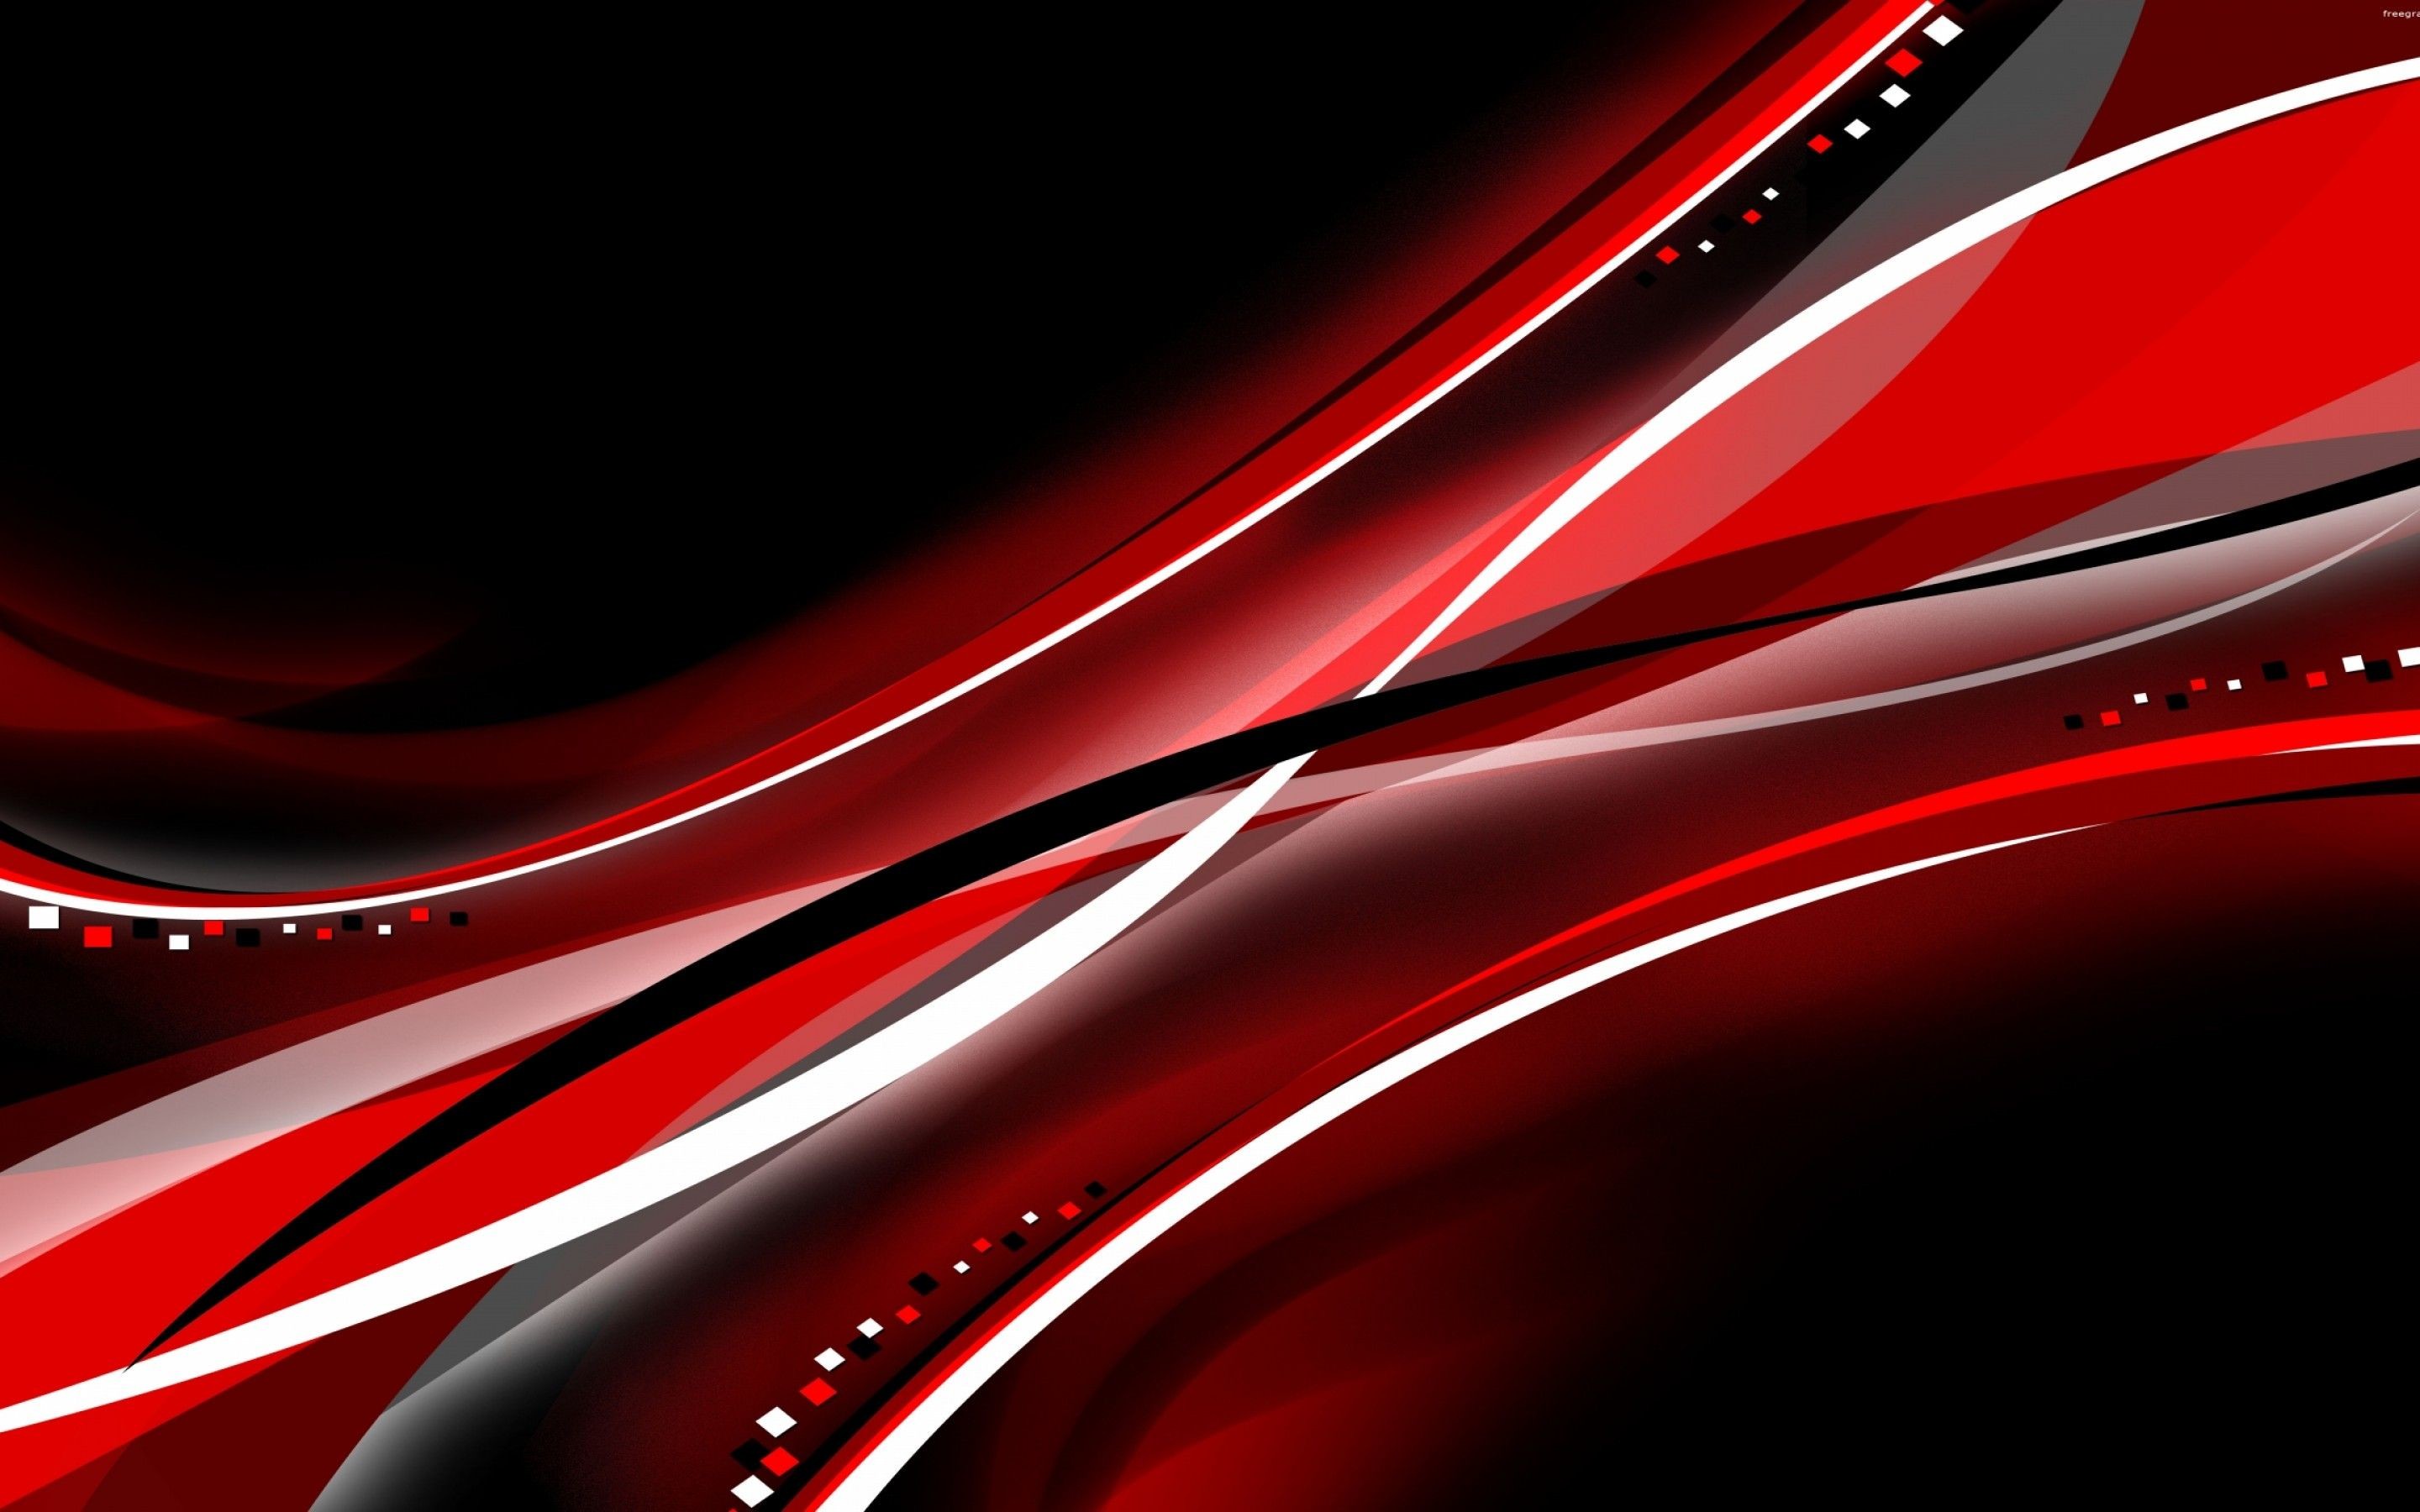 2880x1800 2560x1600 Red Abstract 4K Ultra Hd Wallpaper - HD Wallpapers">